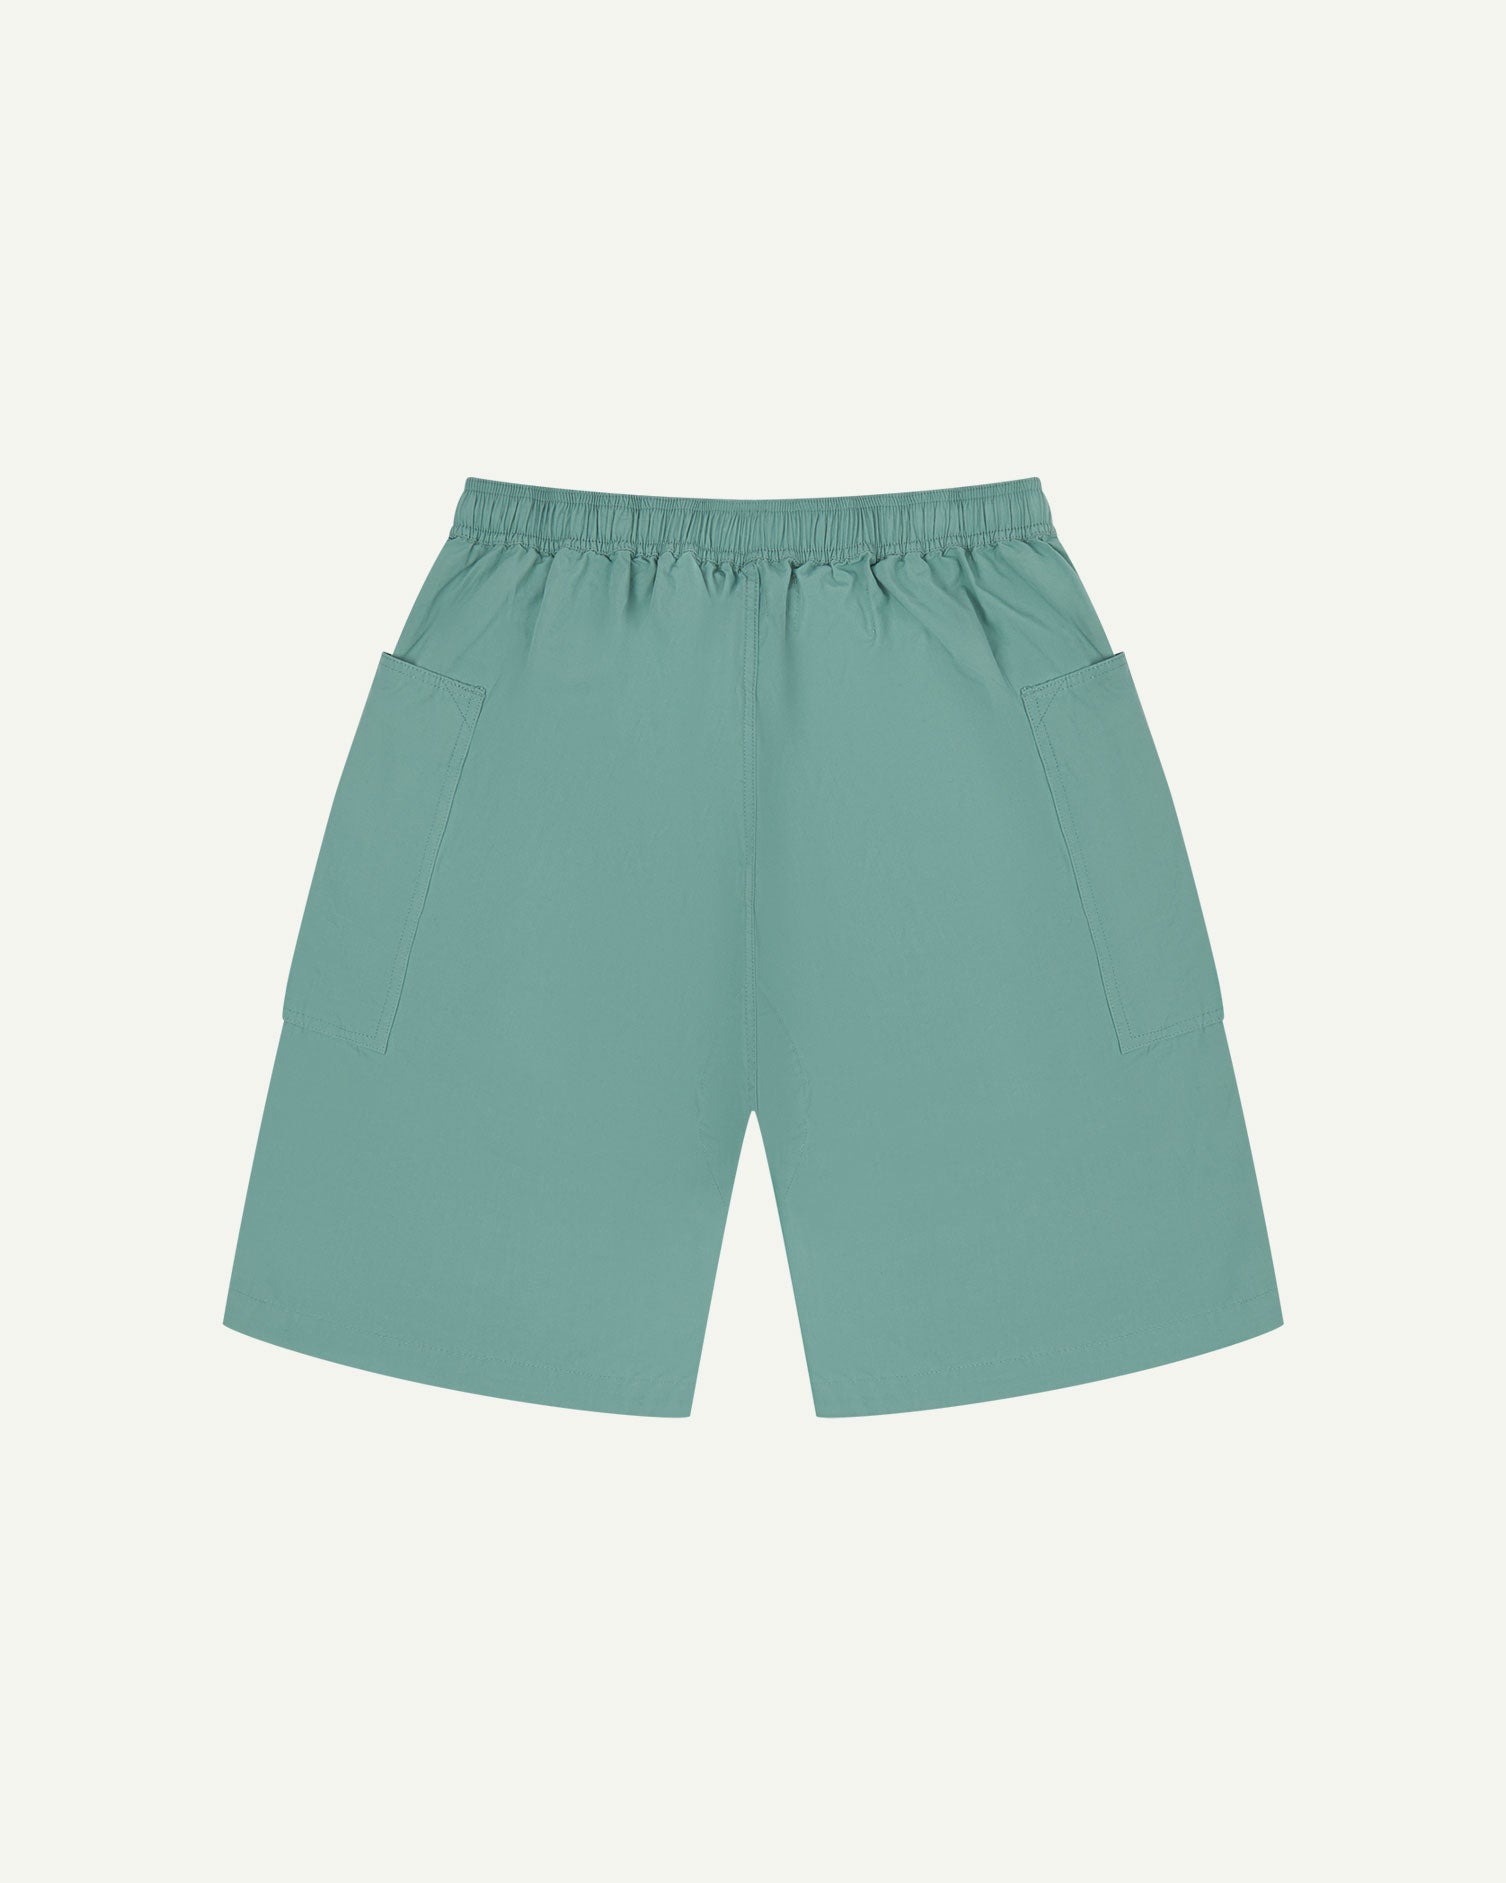 Back flat view of eucalyptus-green organic cotton #5015 lightweight cotton shorts by Uskees. Clear view of lightweight elasticated waist and pockets.